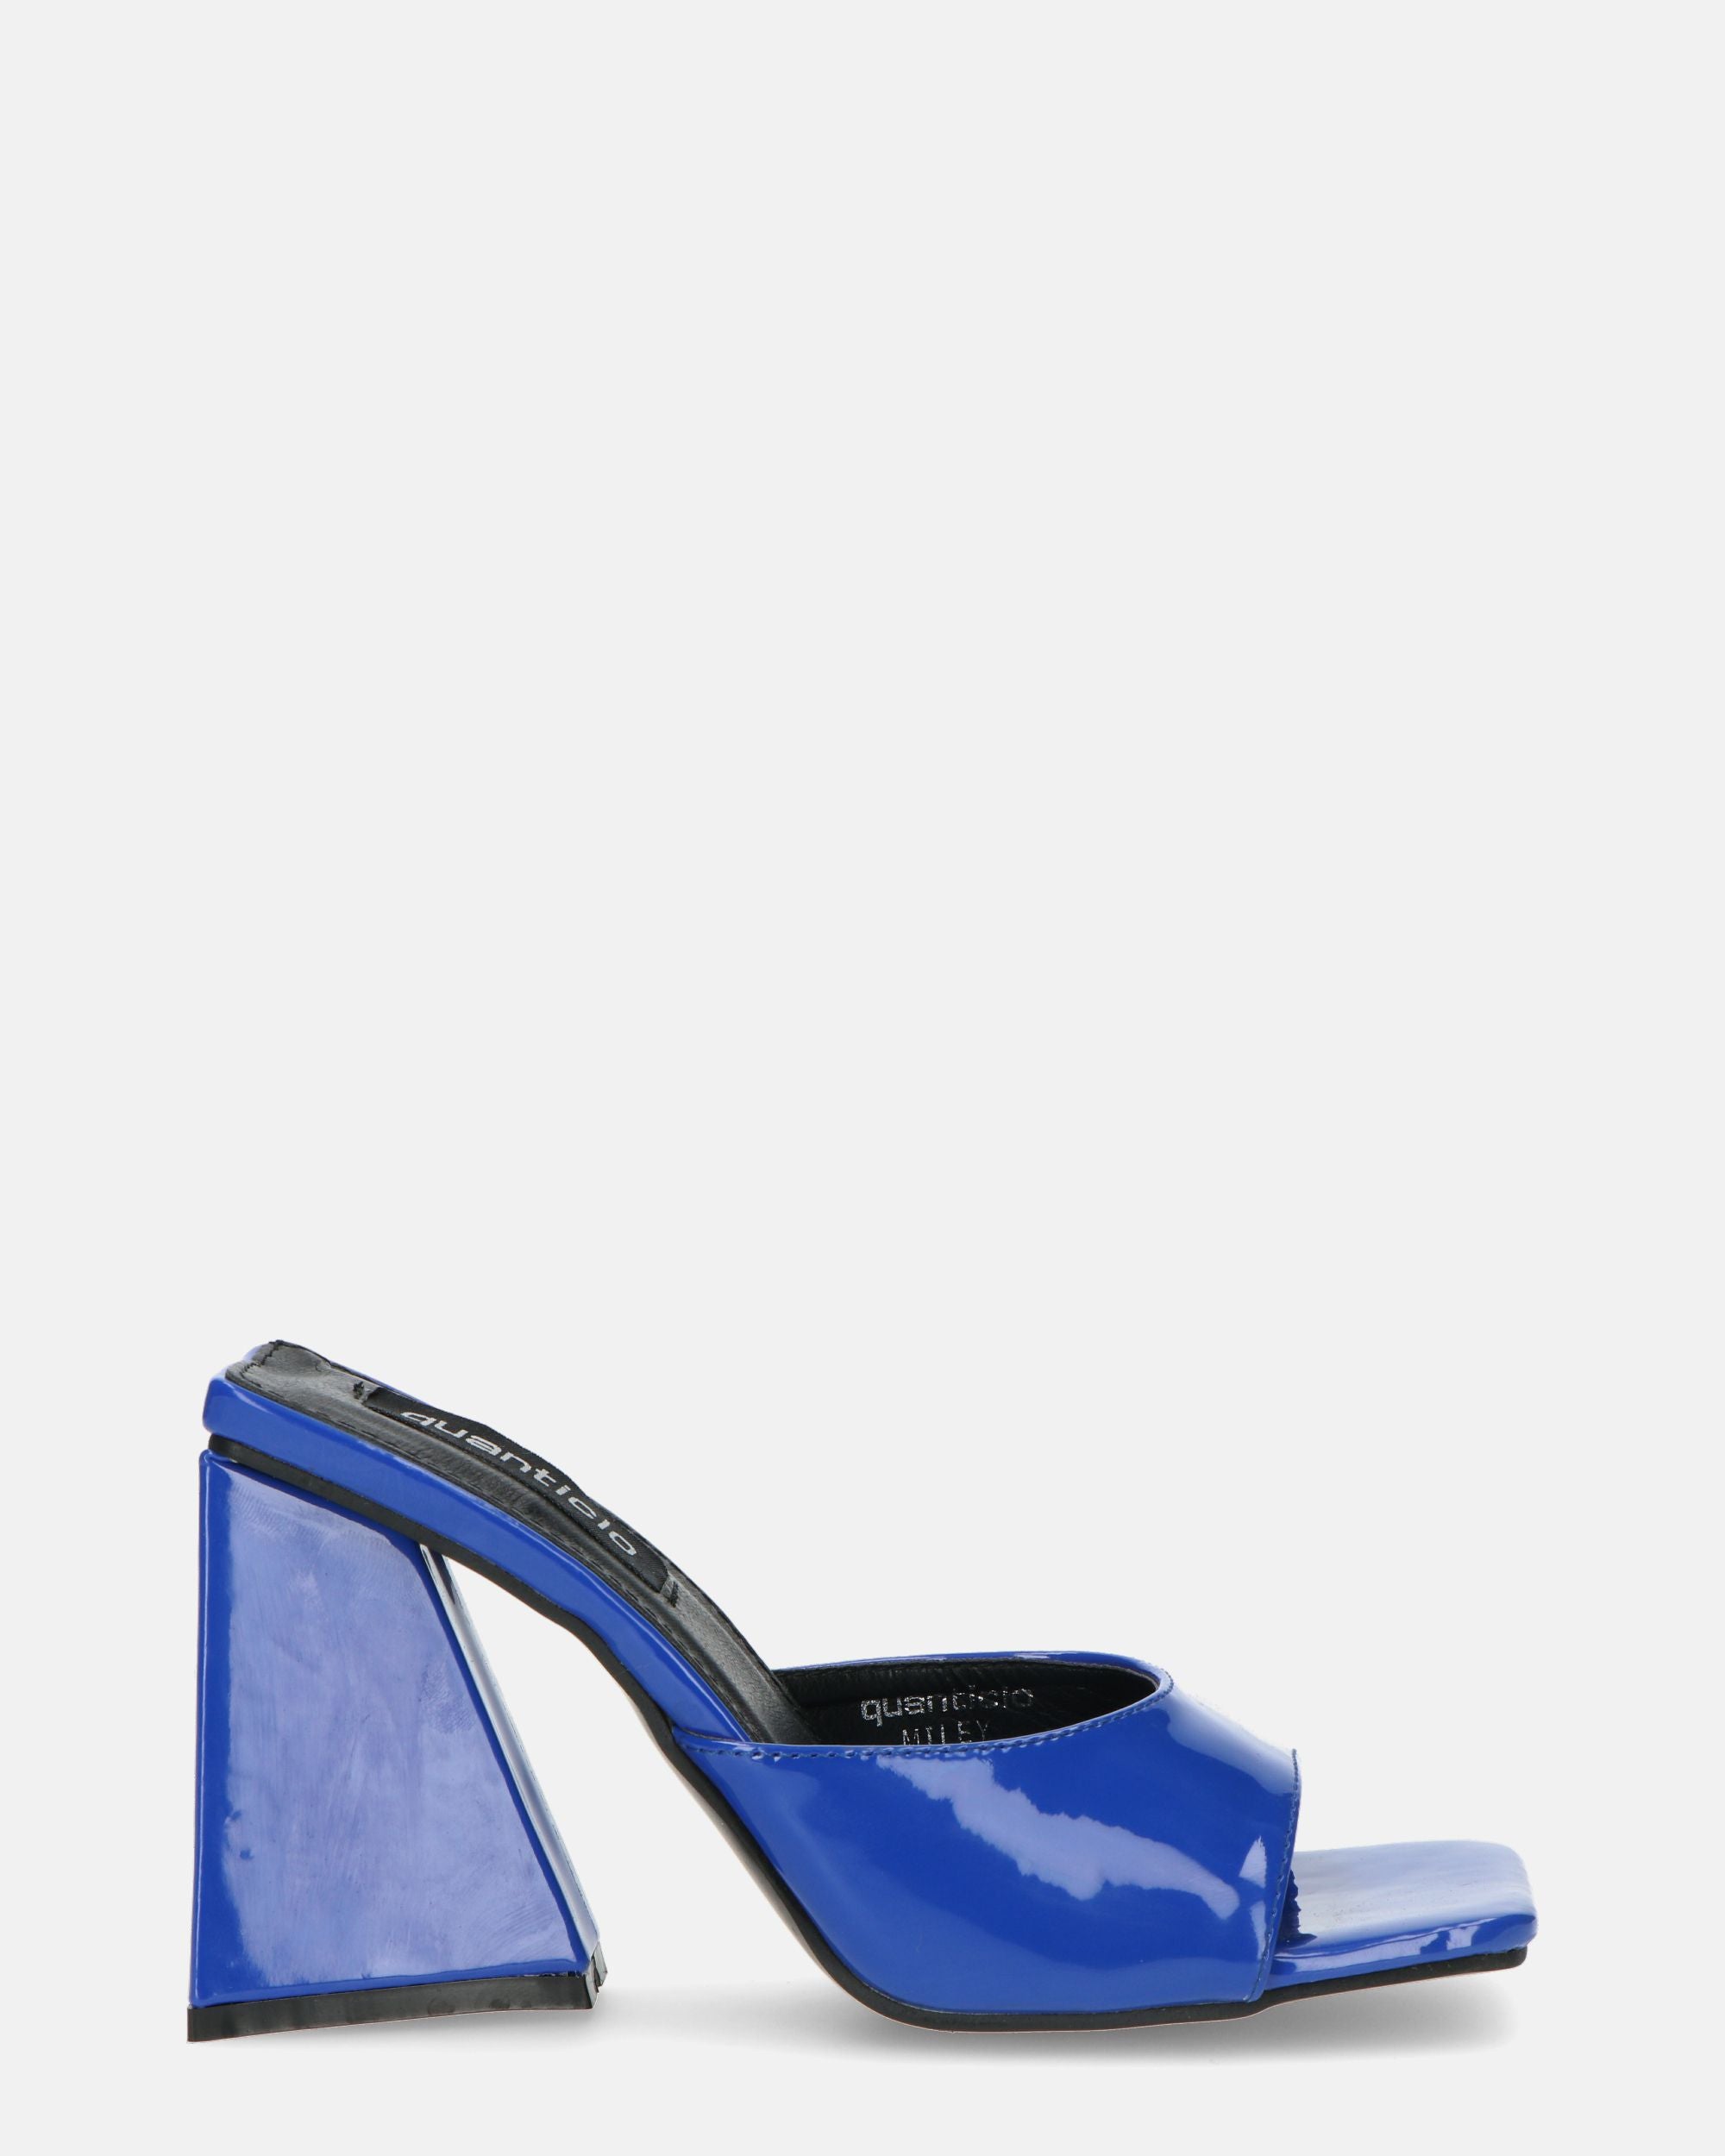 MILEY - blue glassy sandals with squared heel